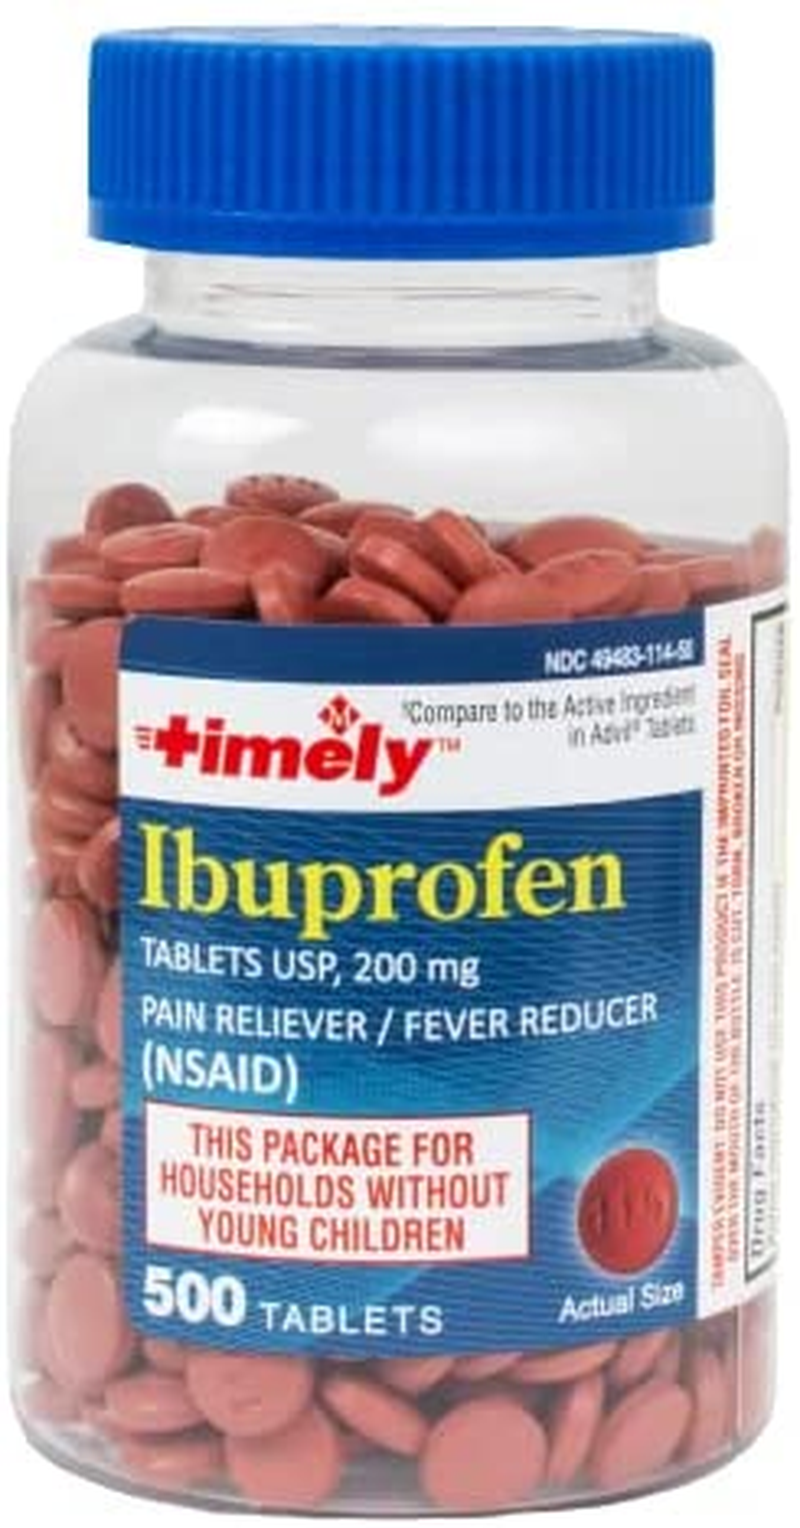 Ibuprofen 200Mg - Pain Relief Tablets and Fever Reducer for Adults - for Headache Relief, Menstrual Pain, Tooth and Joint Aches